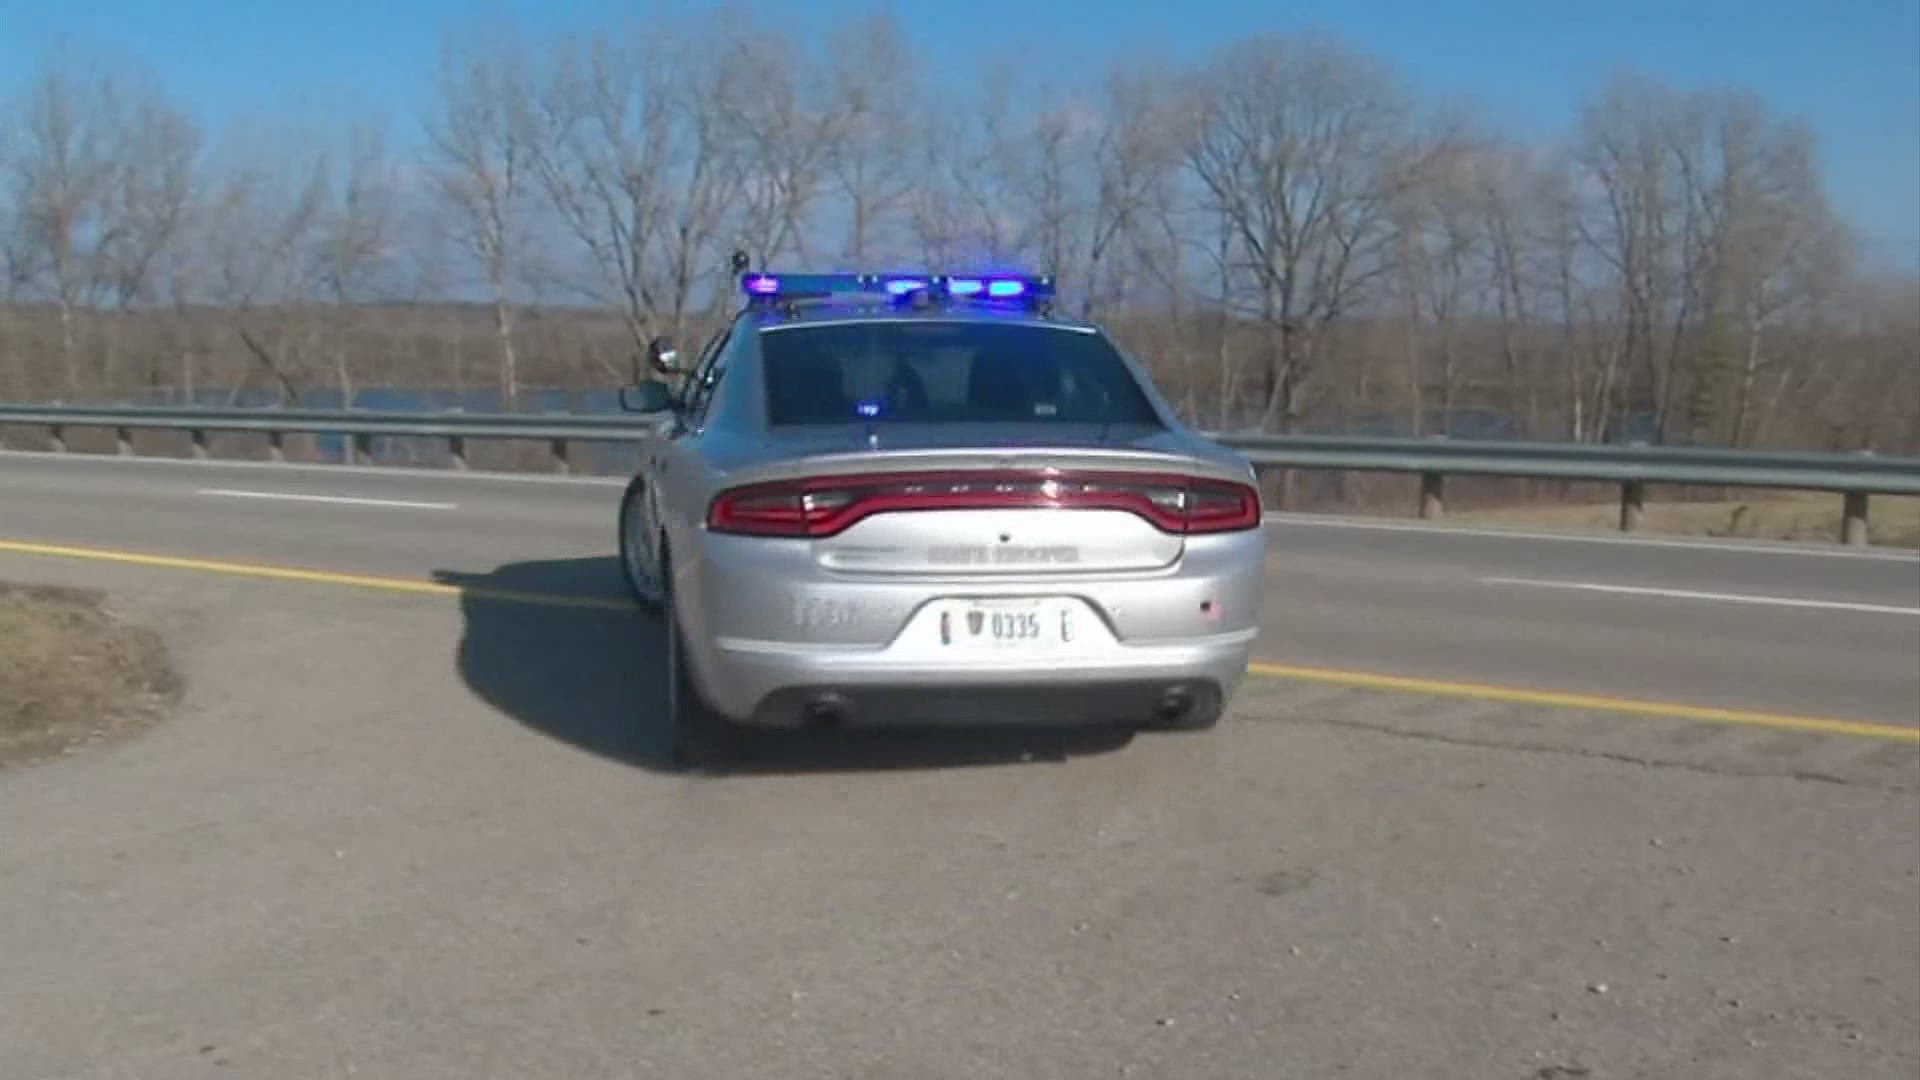 With many people on the road this weekend, state troopers are making sure everyone stays safe